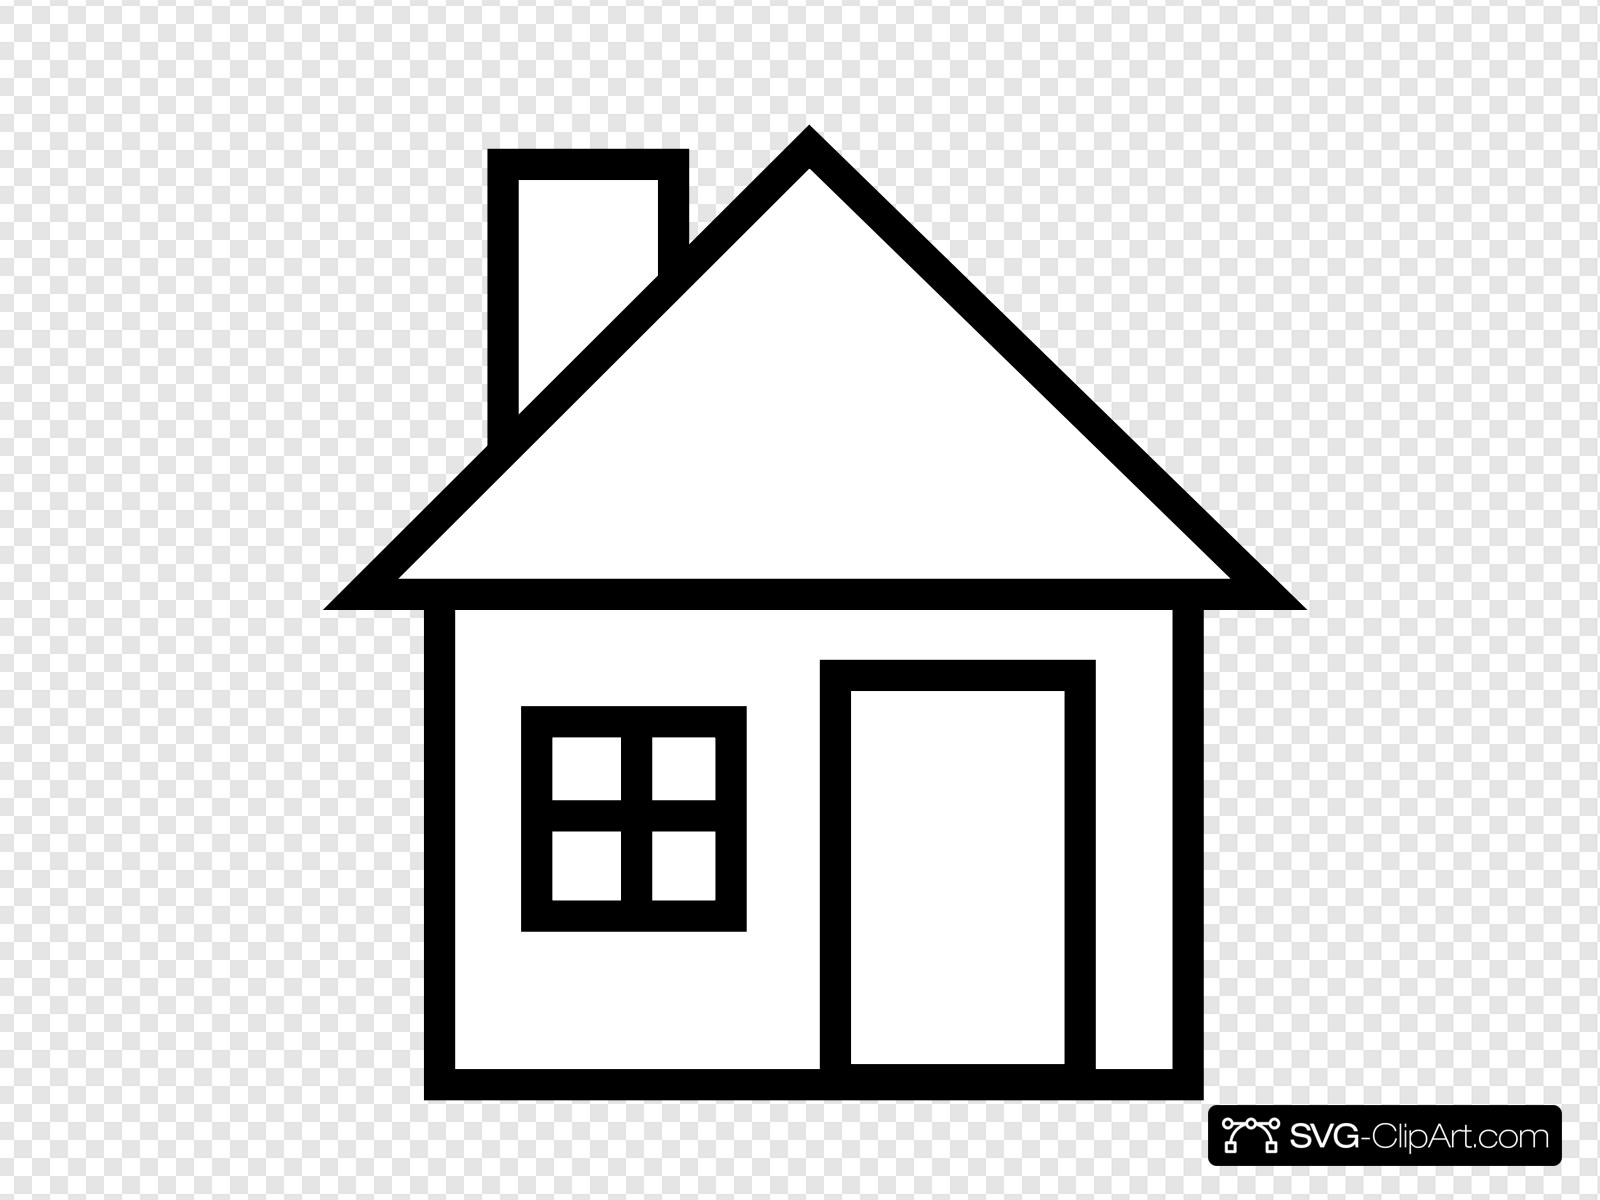 House Clip art, Icon and SVG